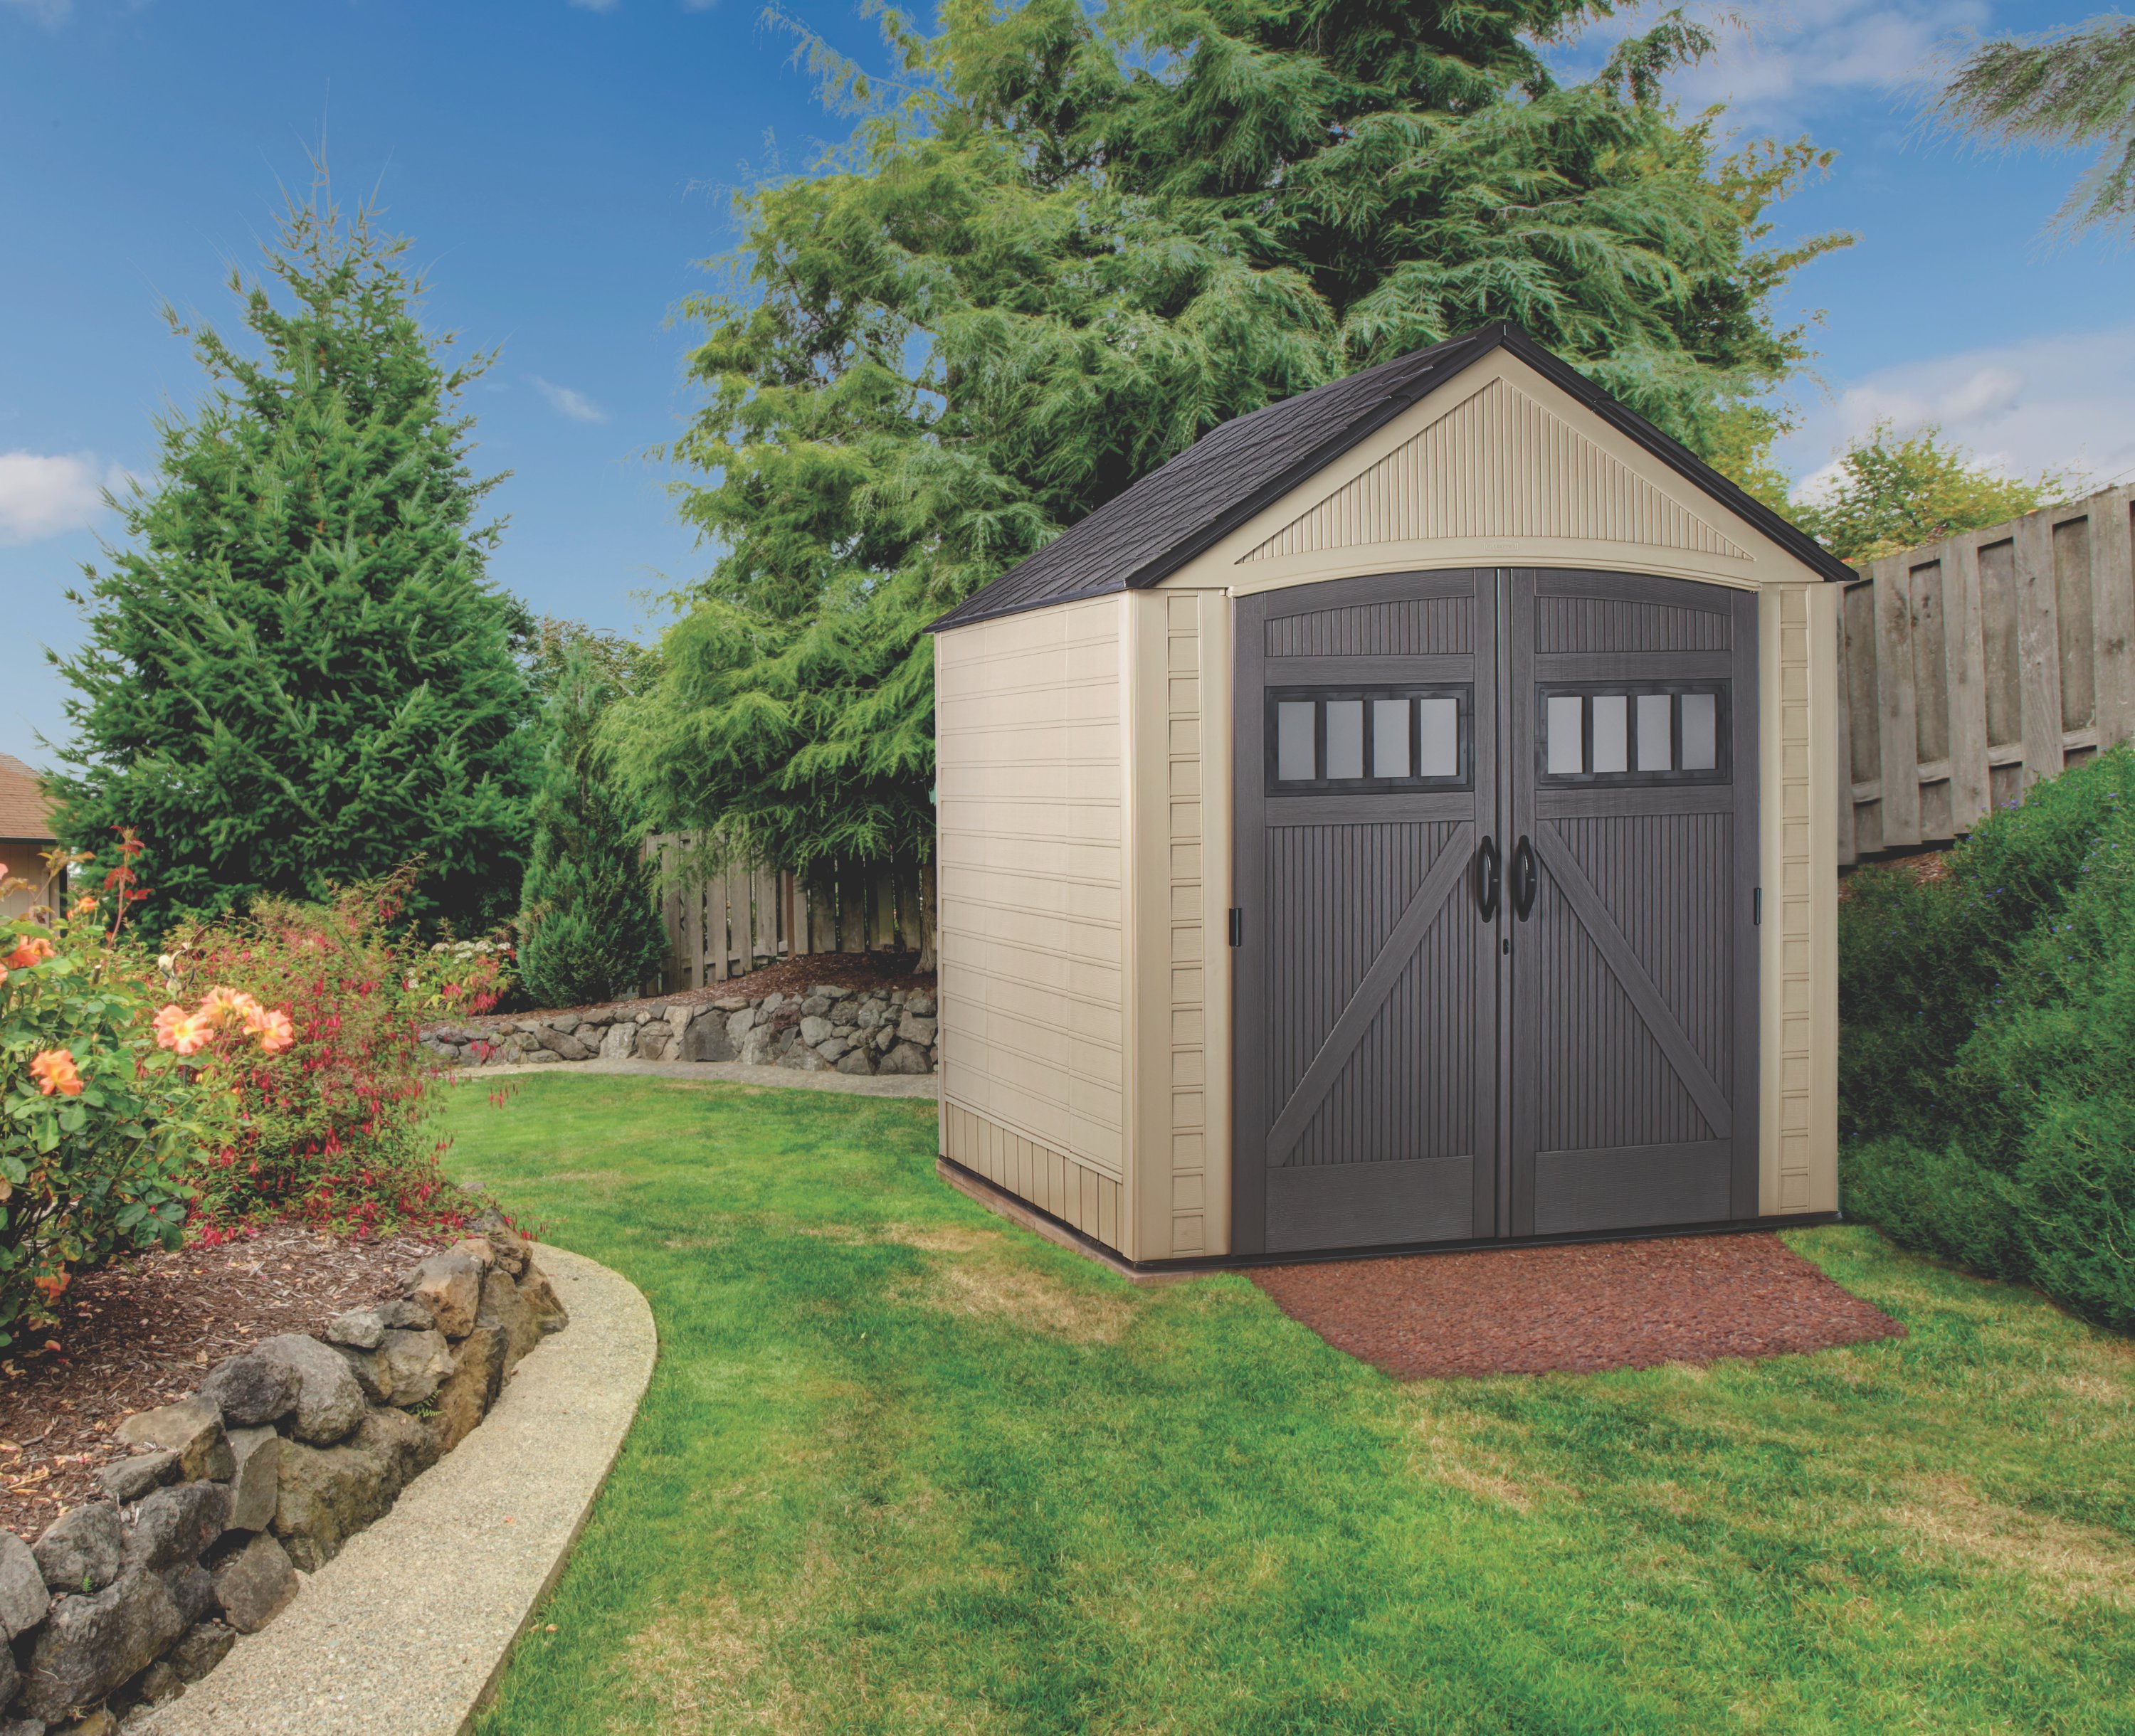 https://s7d9.scene7.com/is/image/NewellRubbermaid/2035893-ccs-outdoor-sheds-7x7-roughneck-faint-maple-backyard-propped-both-doors-open-angle-lifestyle-2